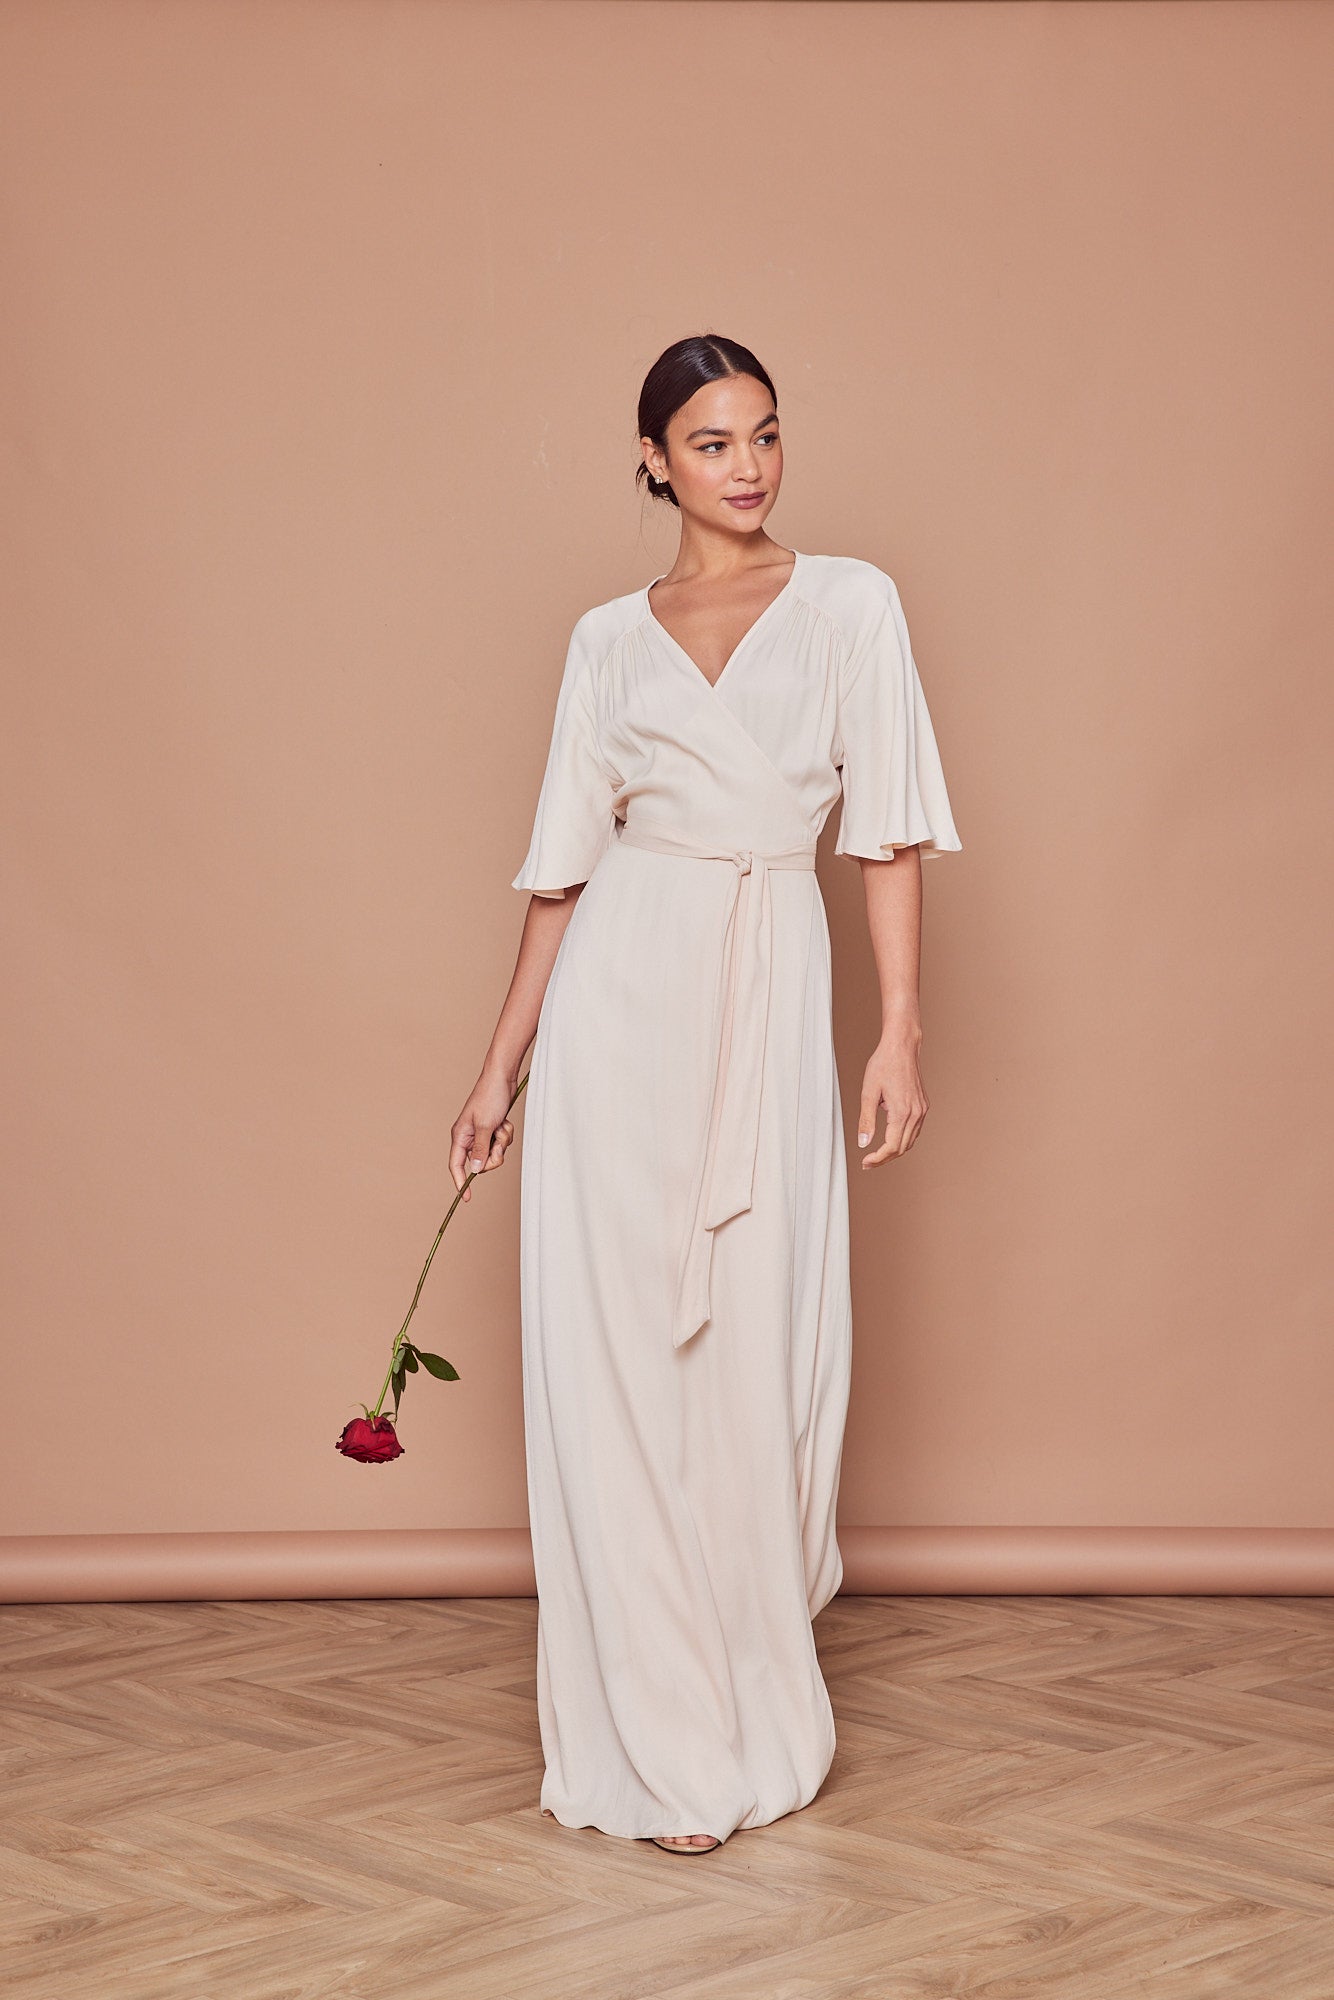 Margot Satin Wrap Dress - Champagne Ivory - Maids to Measure